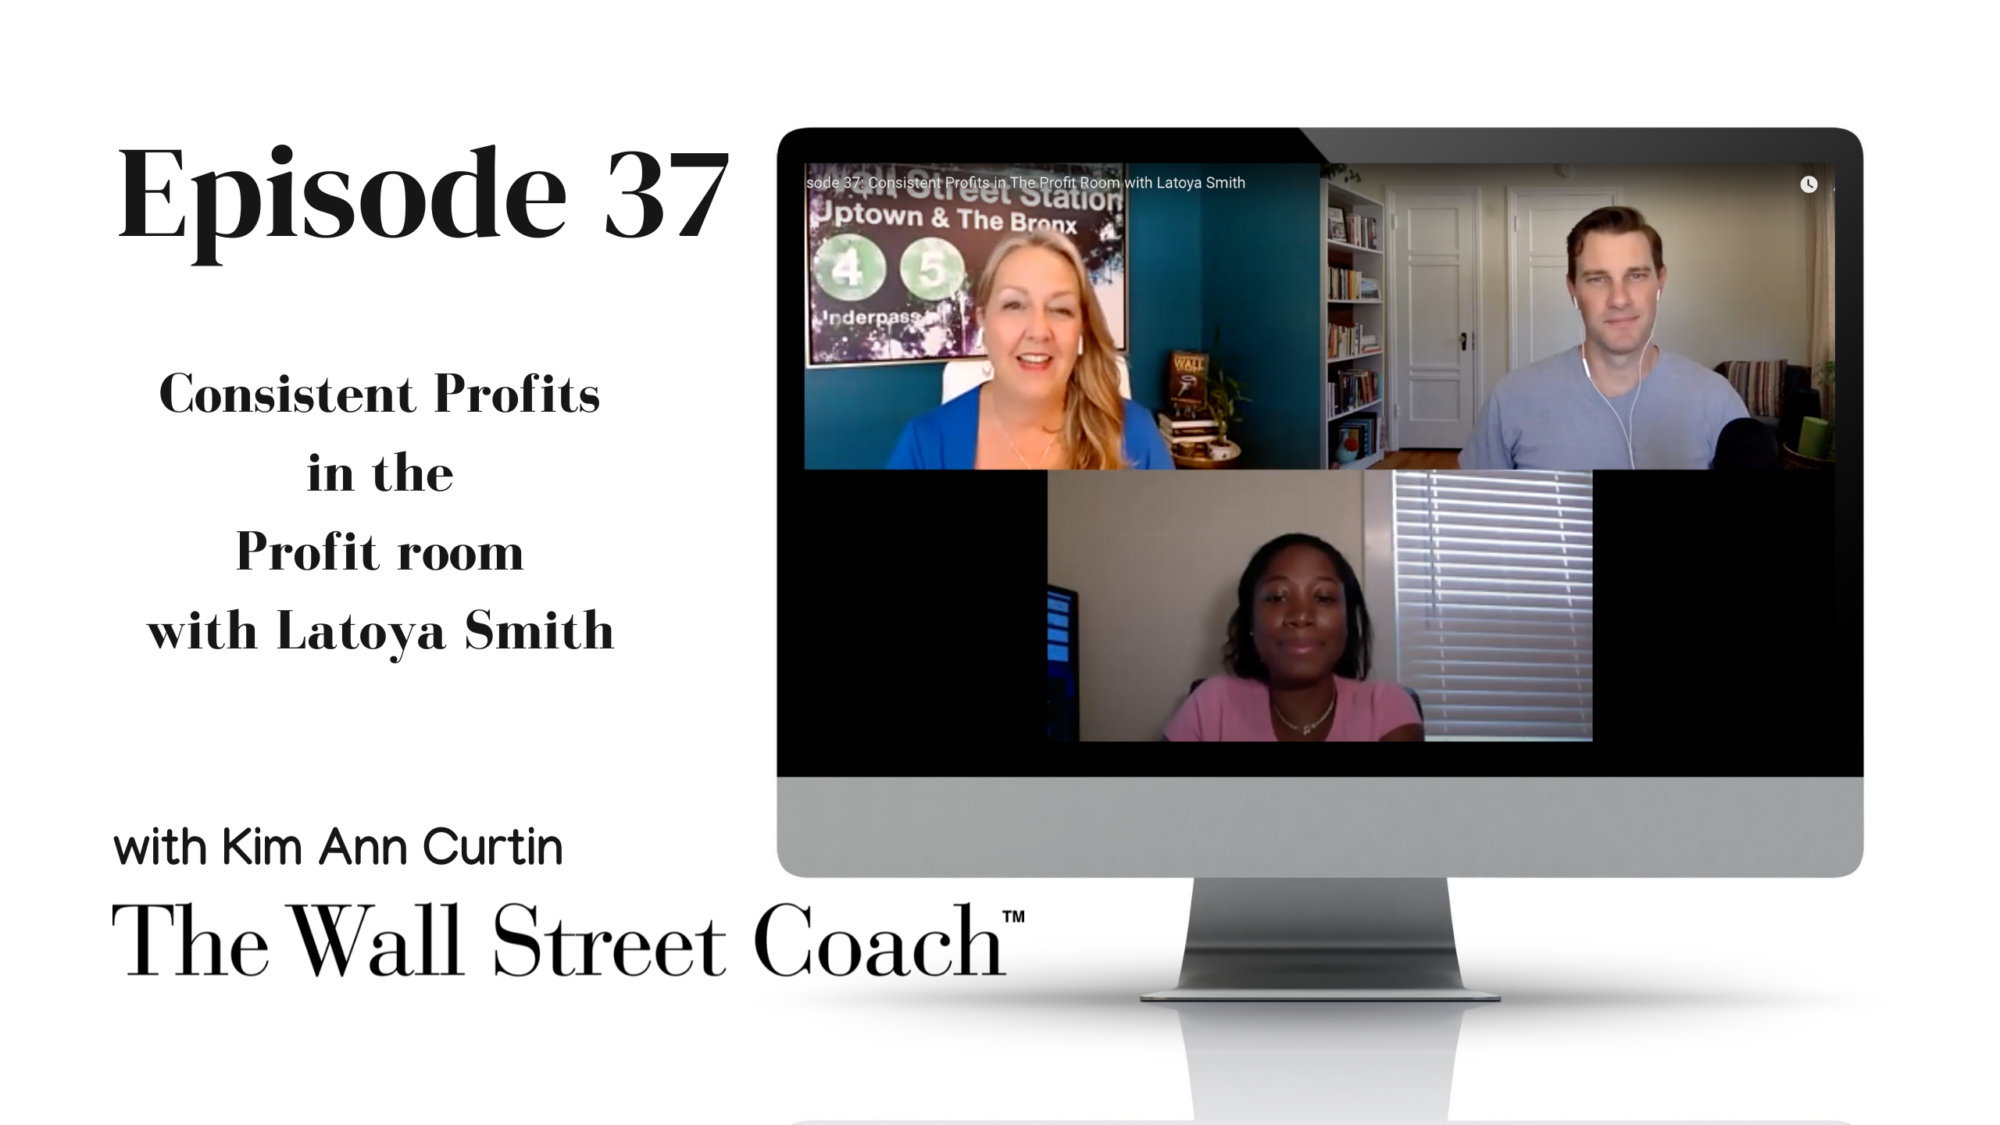 Episode 37: Consistent Profits in the Profit Room with Latoya Smith